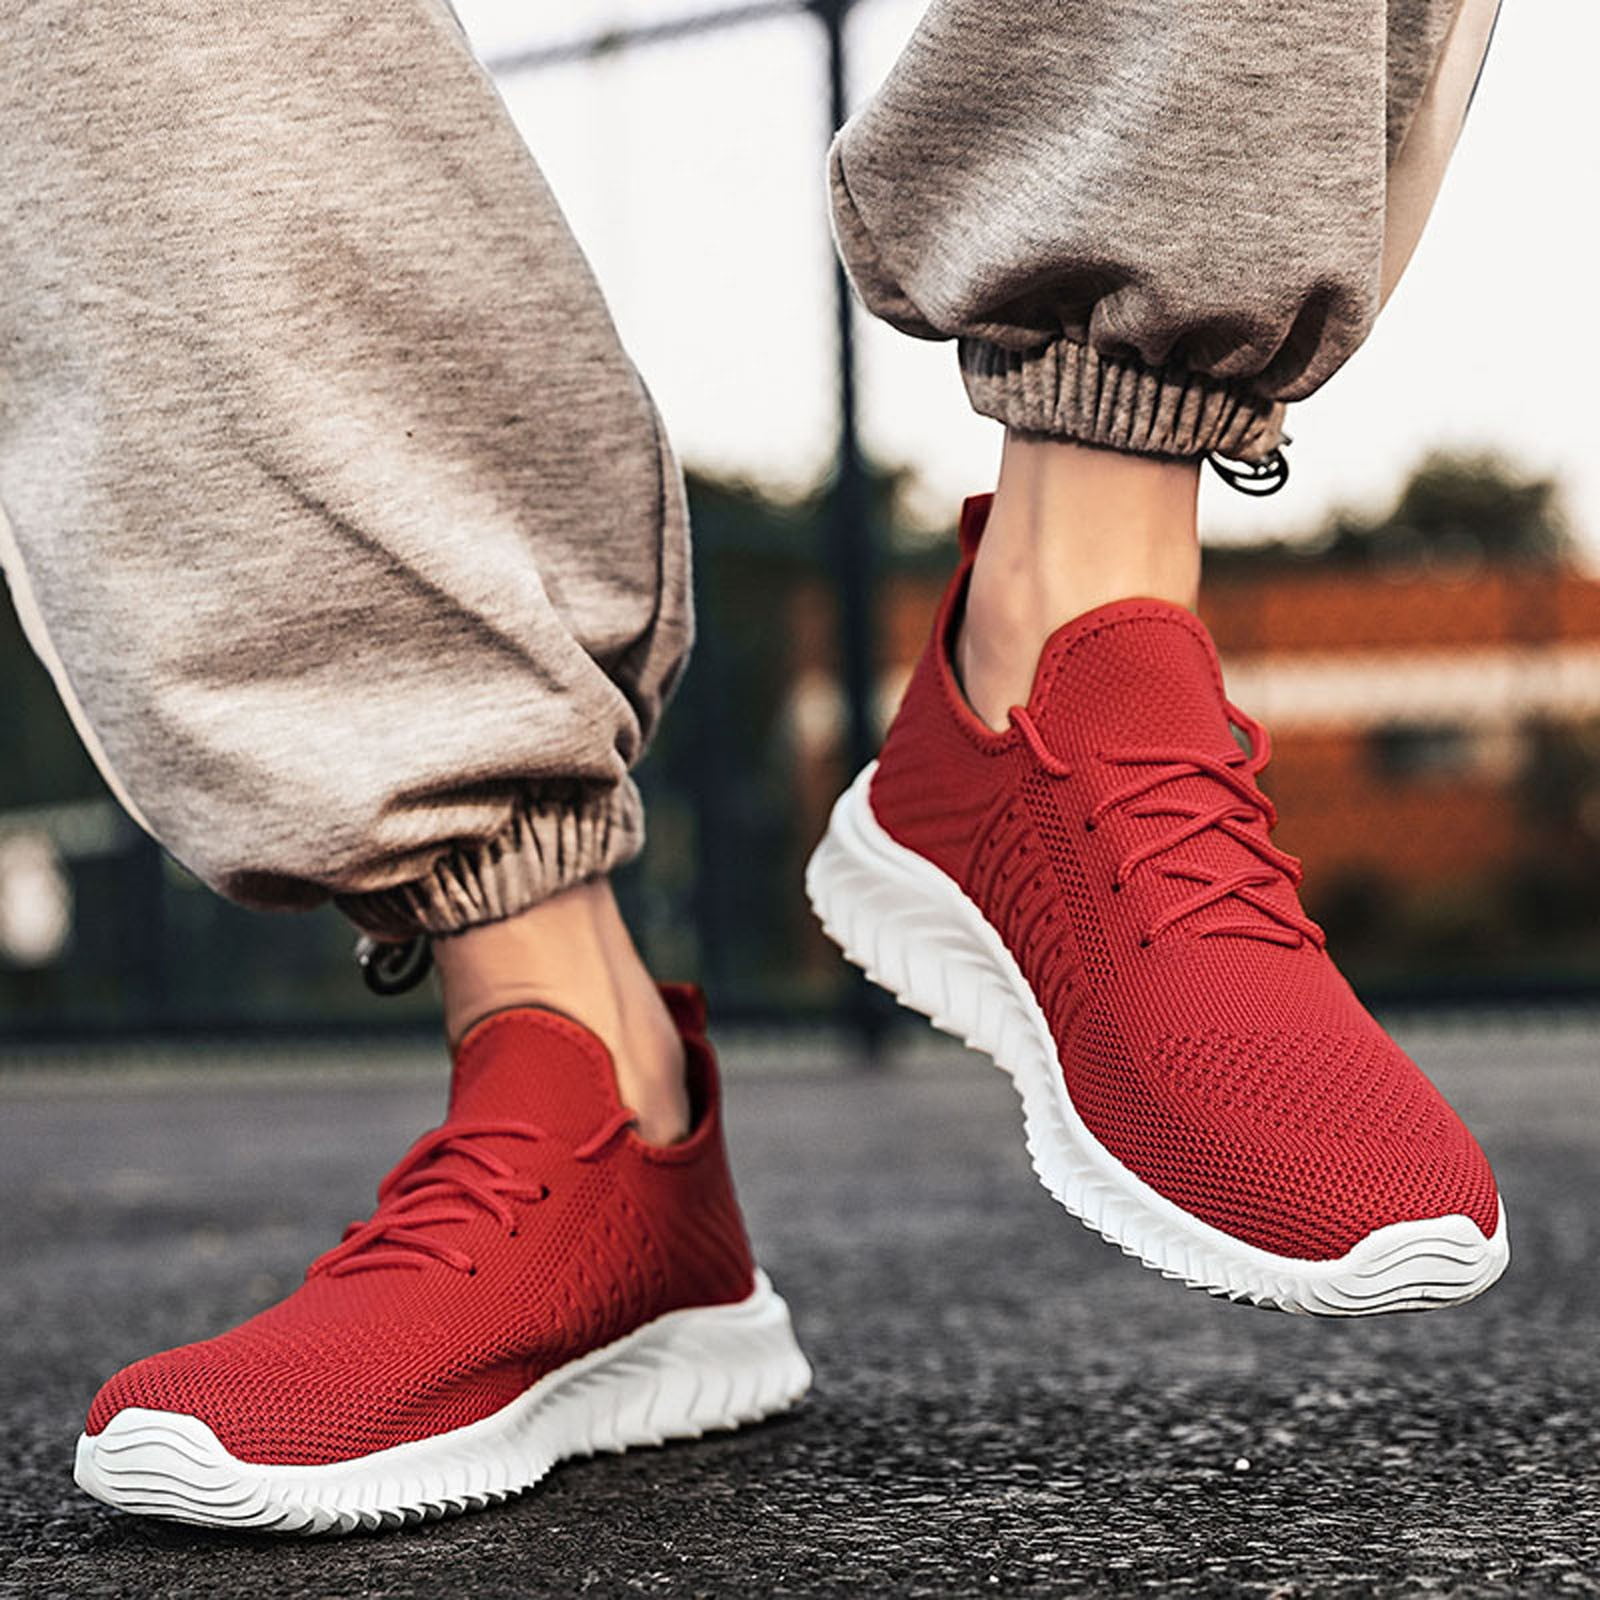 Stylish Sneakers for Women